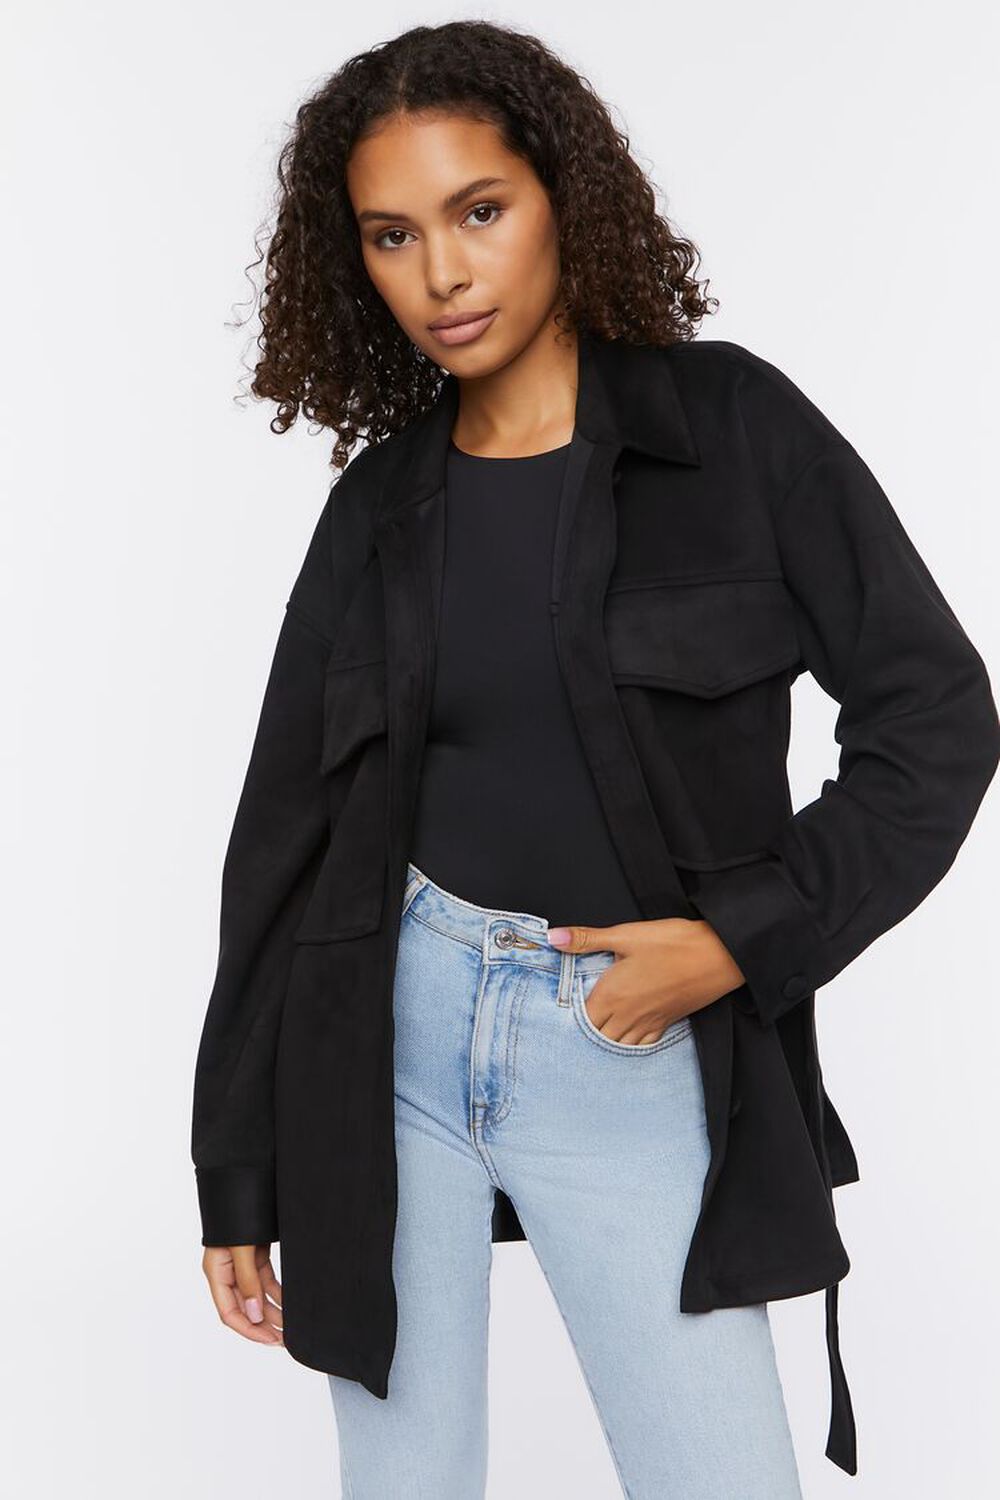 BLACK Faux Suede Trench Jacket, image 1